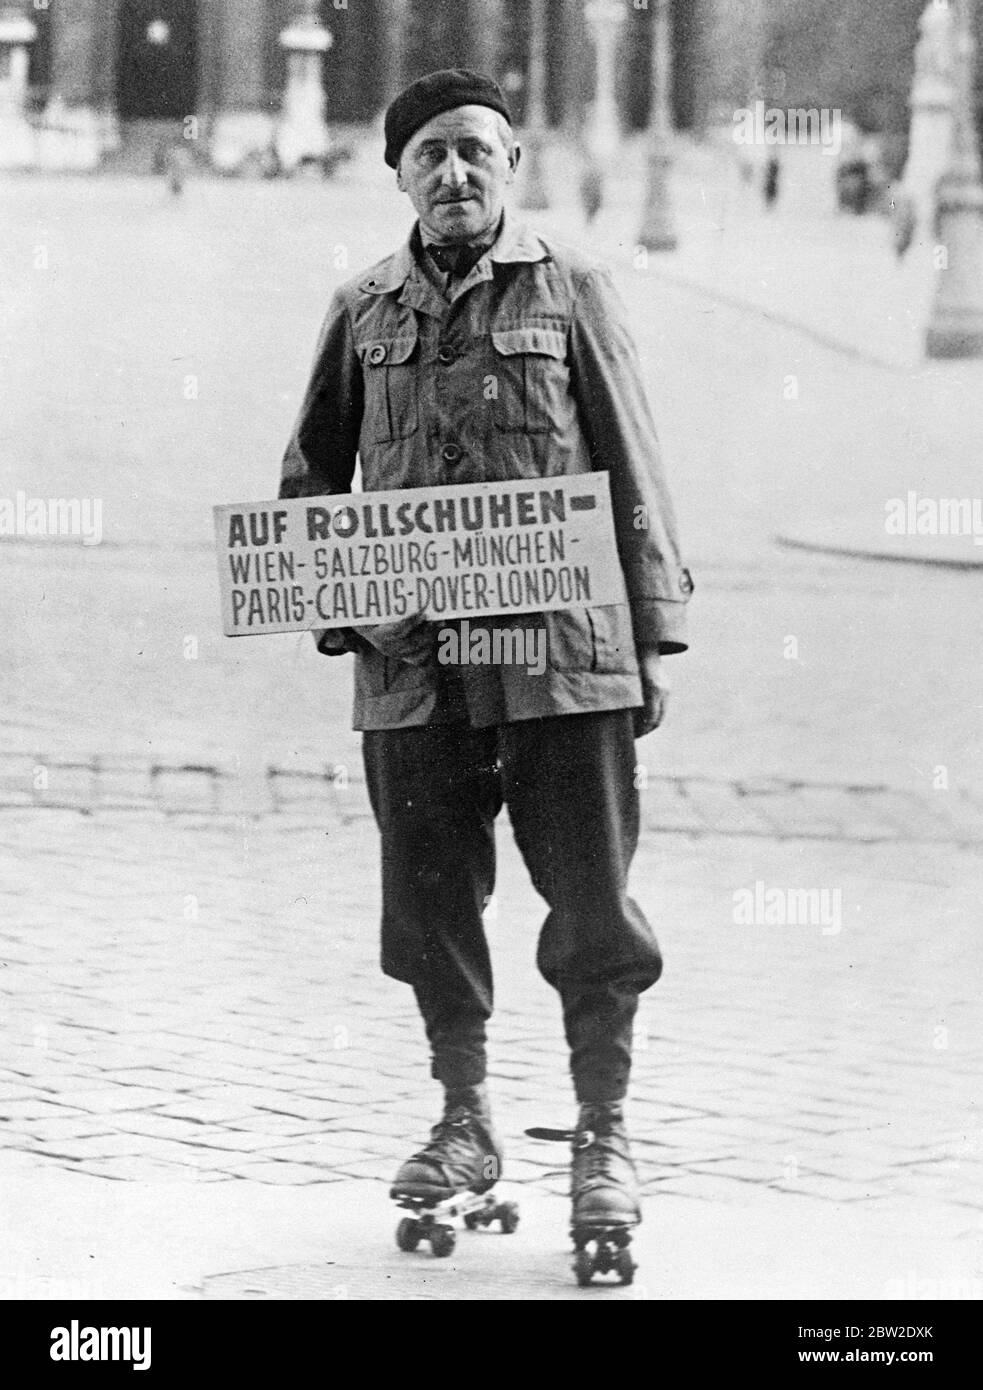 Karl Riemer, a waiter pictured as he set out from Vienna on roller skates.  He is attempting to roller skate across Europe to London. His route takes  him through Salzburg, Munich, Paris,